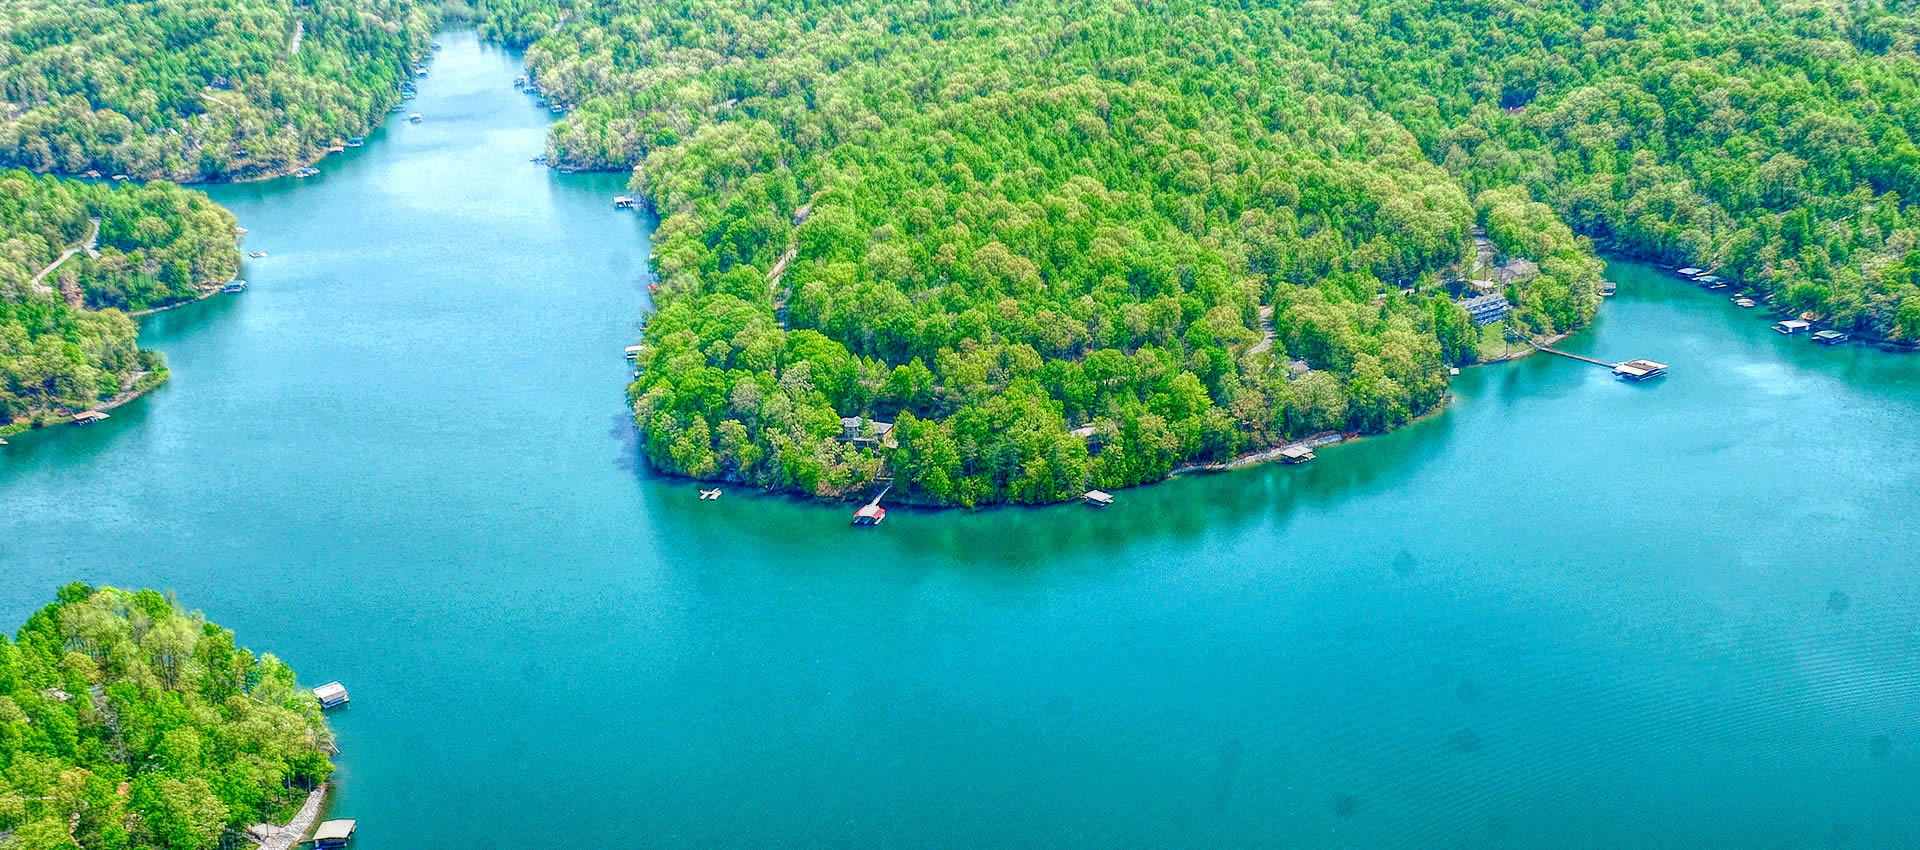 cove pointe real estate for sale on norris lake